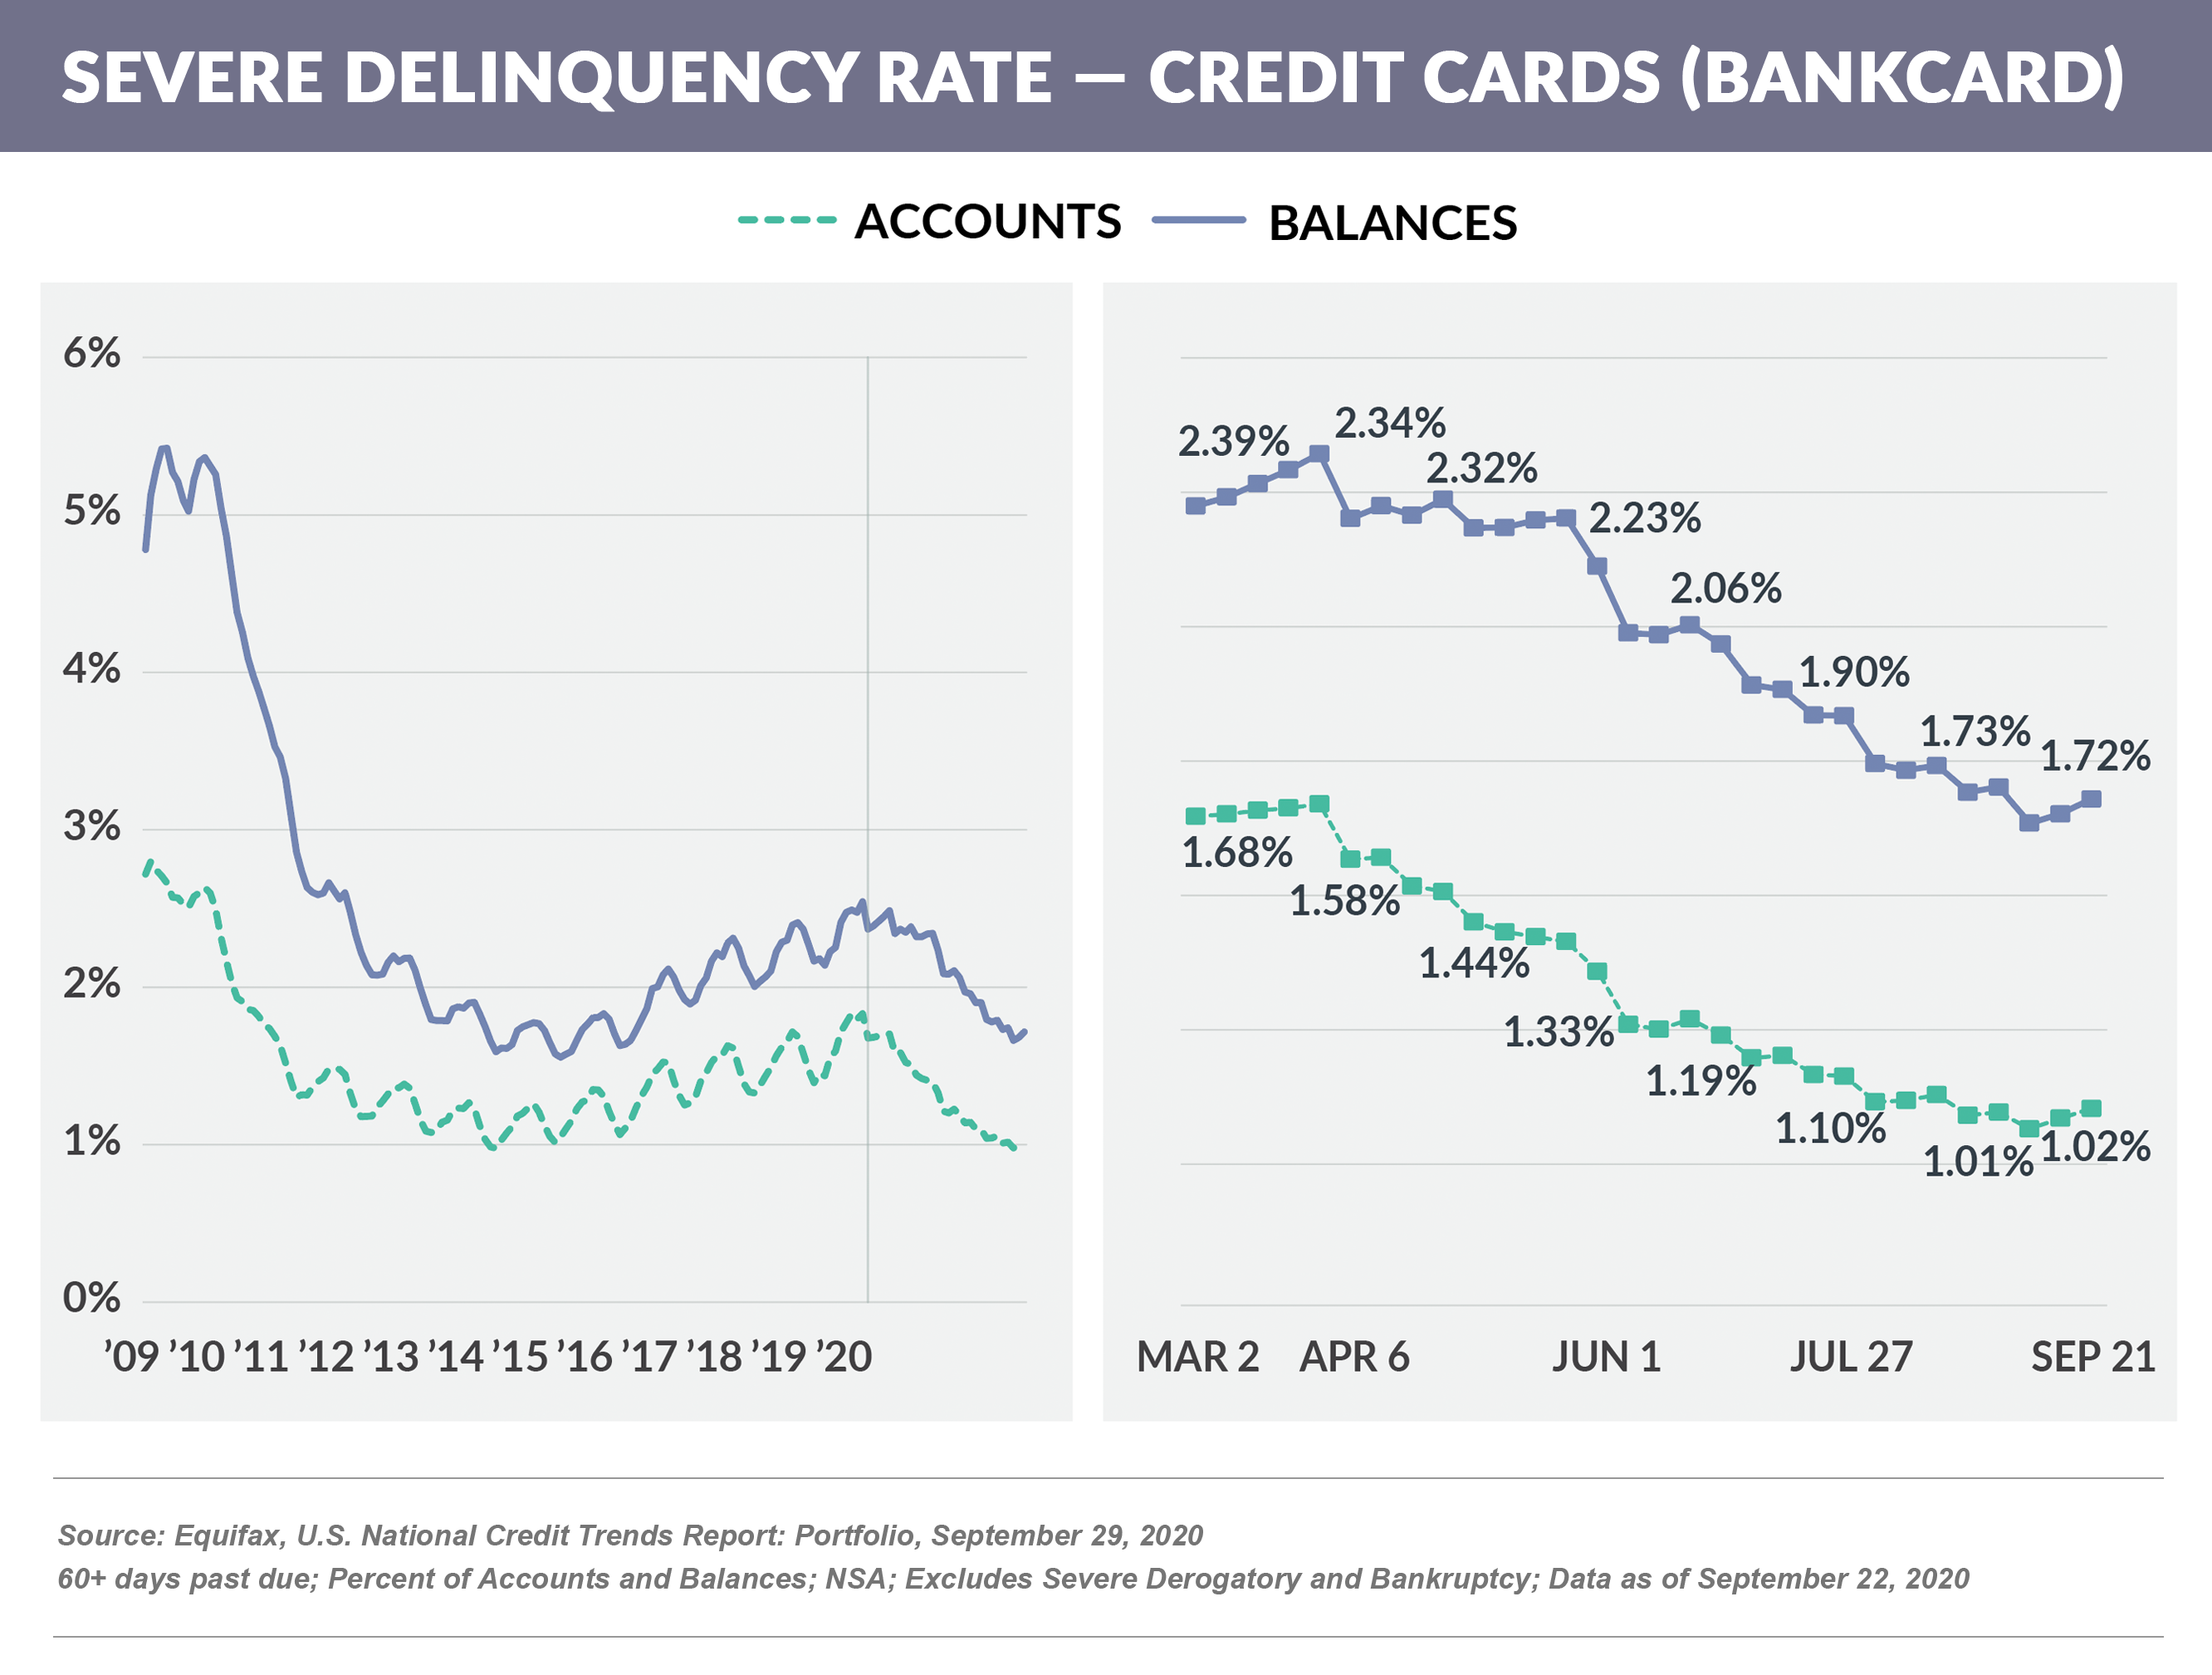 SEVERE DELINQUENCY RATE — BANKCARD 20201010 (1)